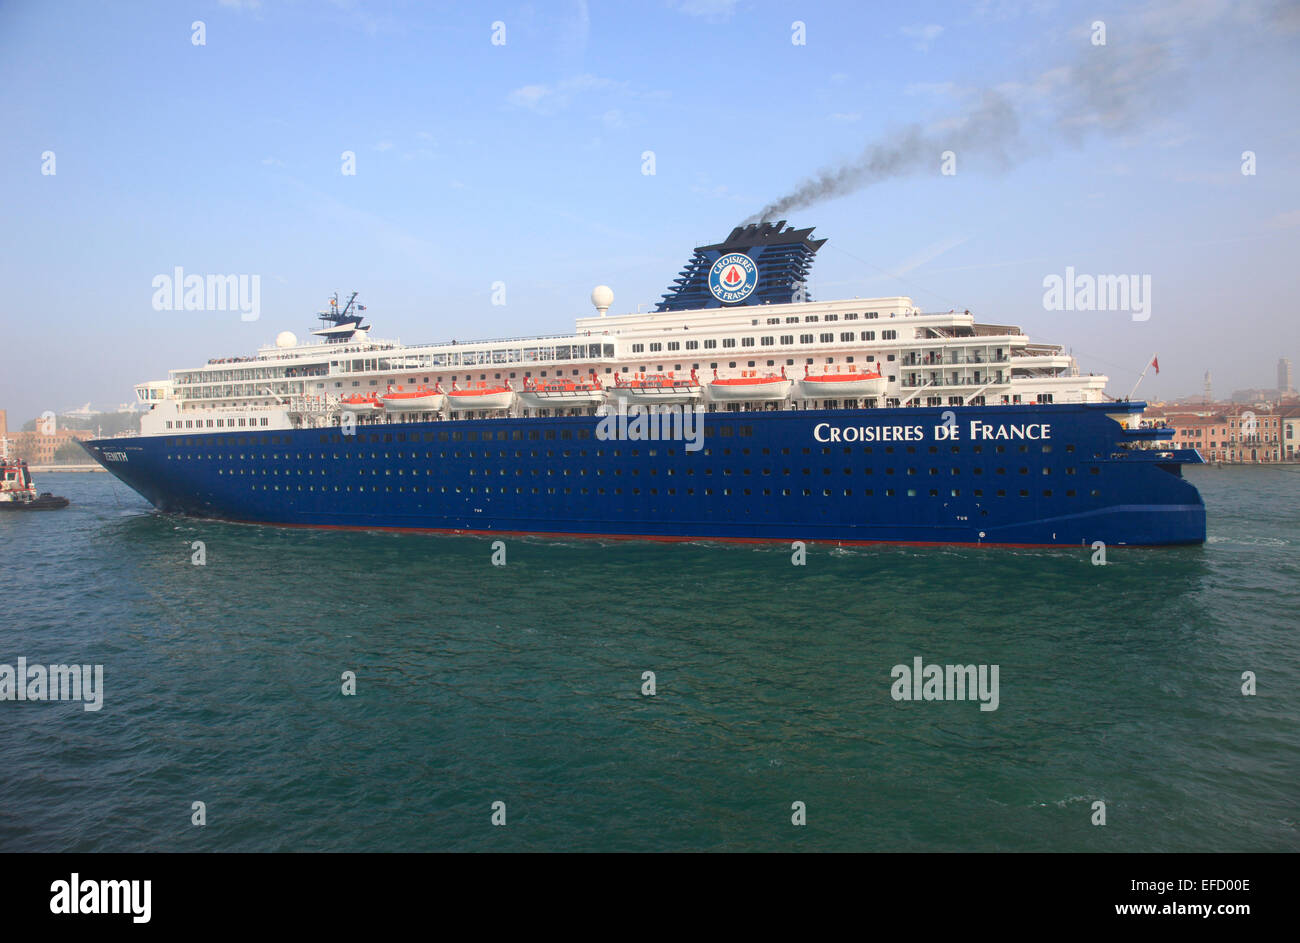 Cruise ship Zenith of Croisieres de France arriving in Venice Italy Stock Photo